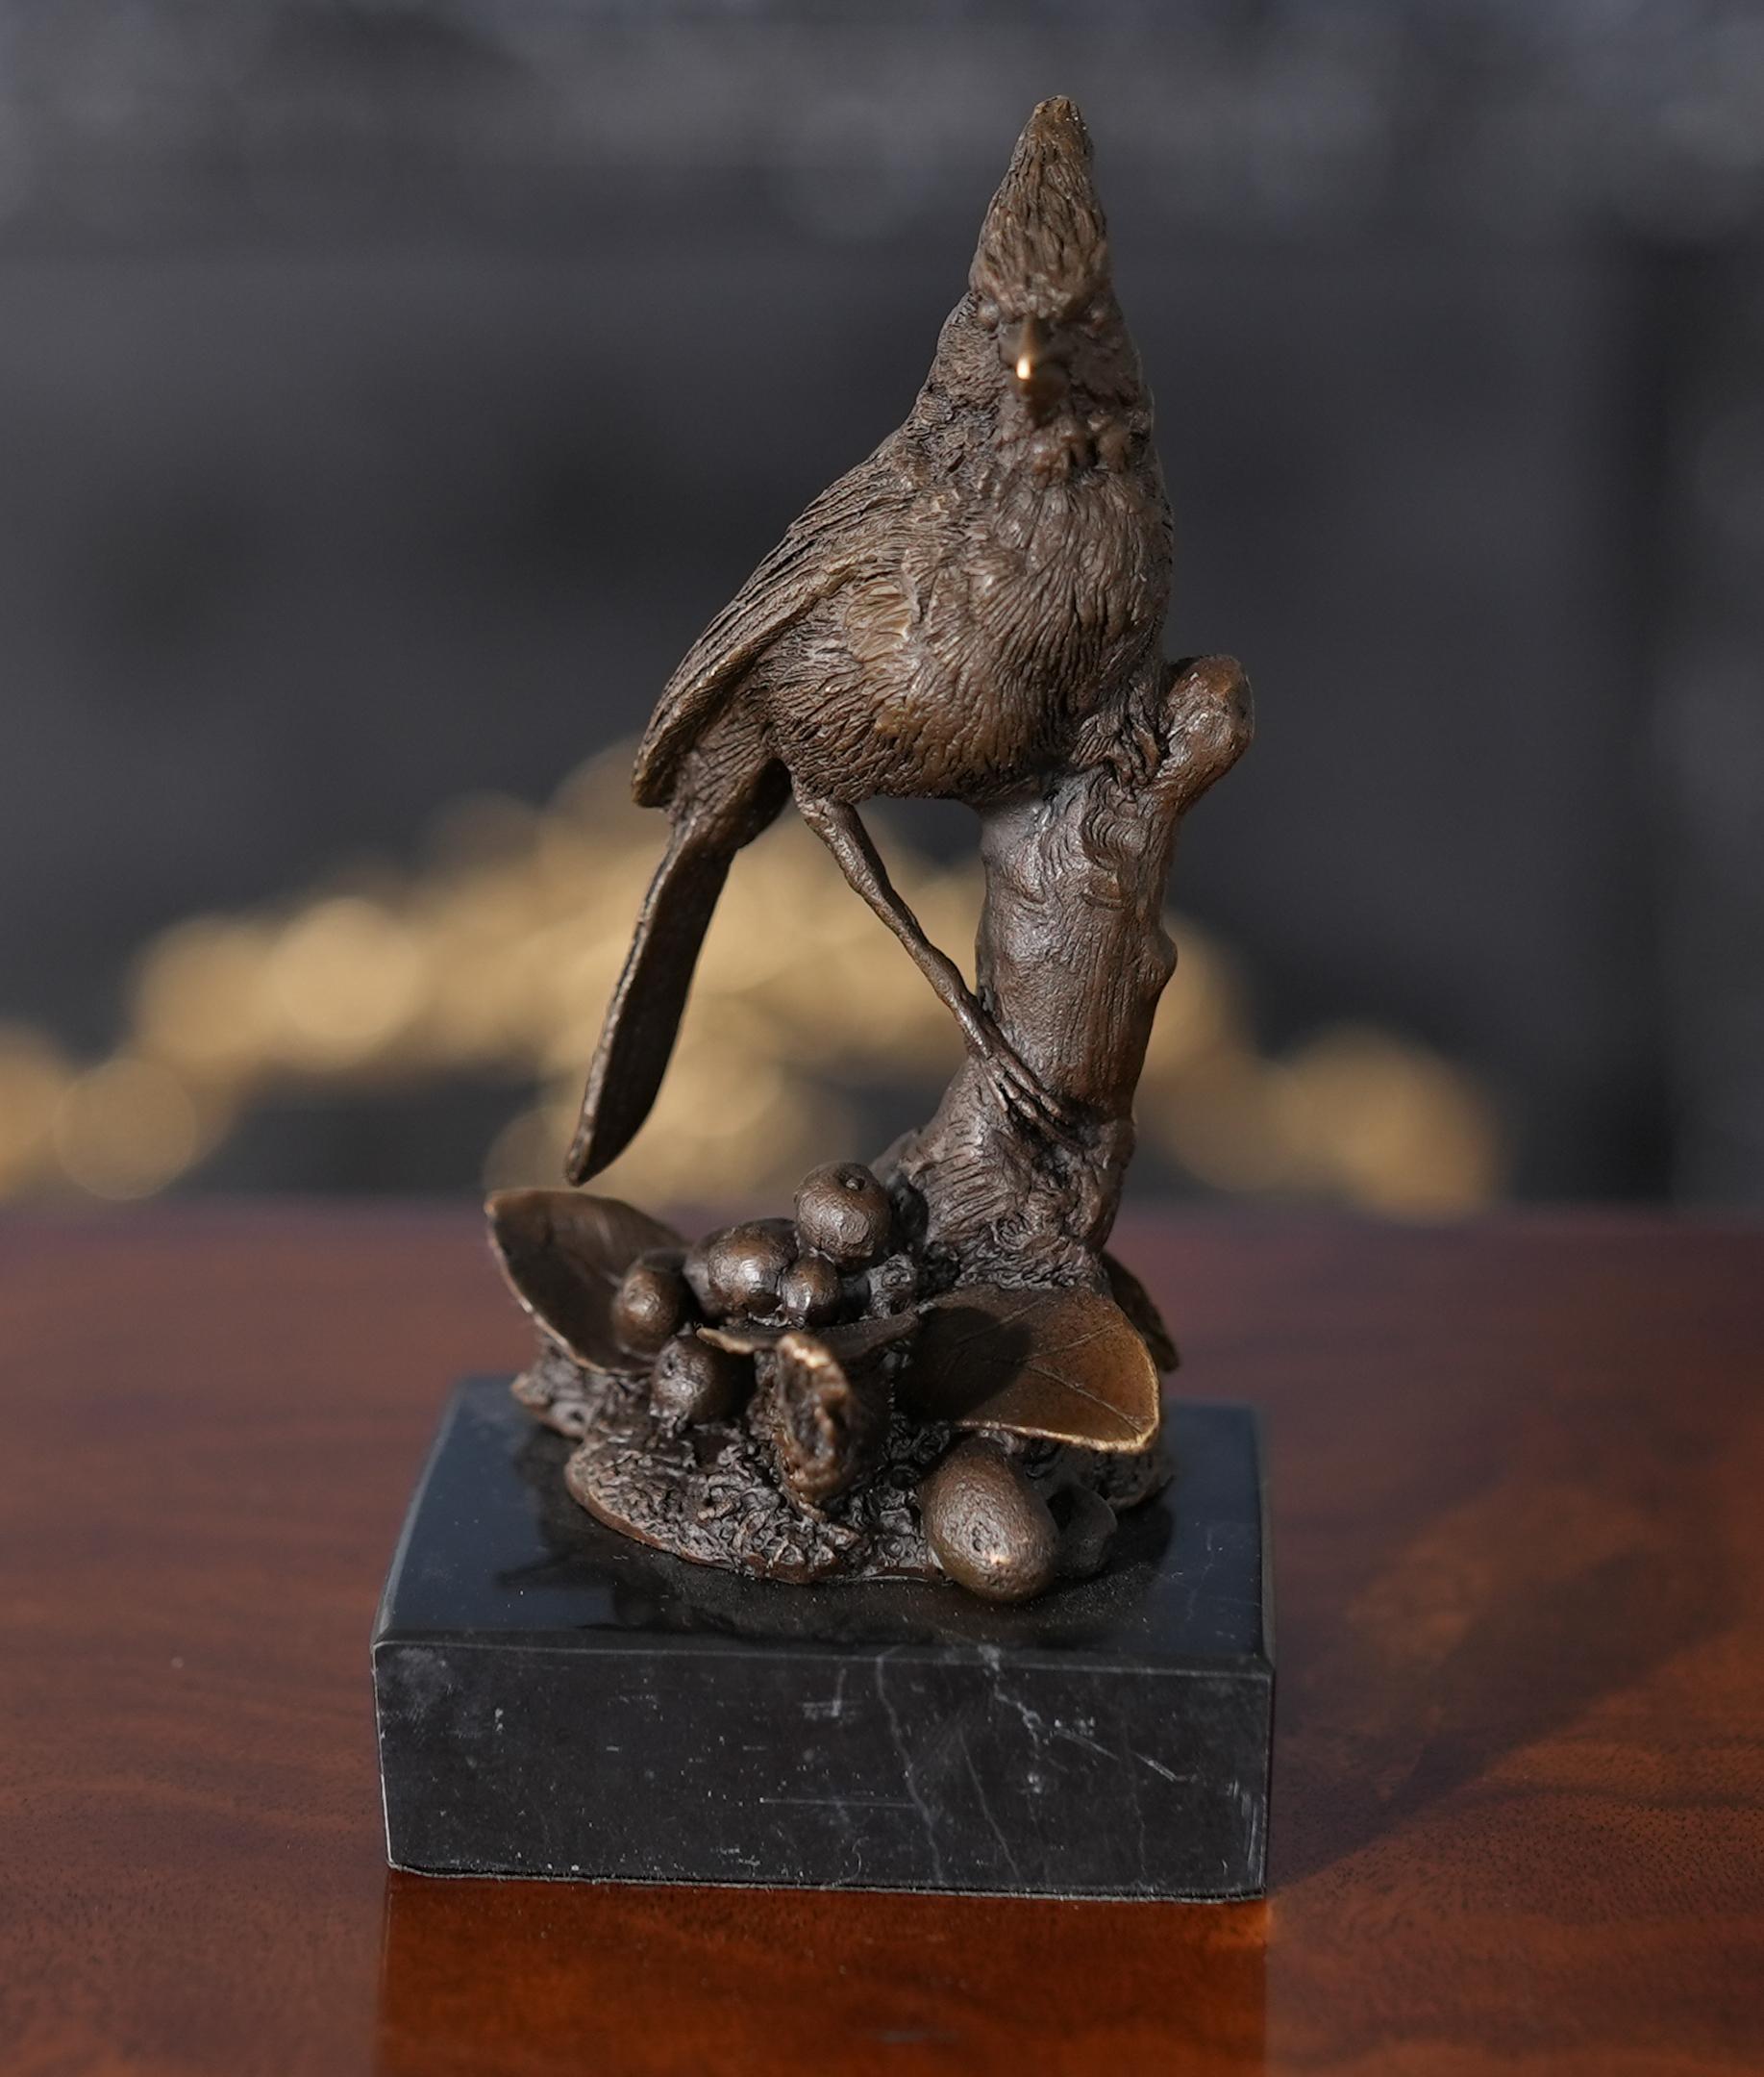 Graceful even when standing still the Bronze Cardinal on Marble Base is a striking addition to any setting. Using traditional lost wax casting methods the Bronze Cardinal statue has hand chaised details added to give it a high level of detail to the